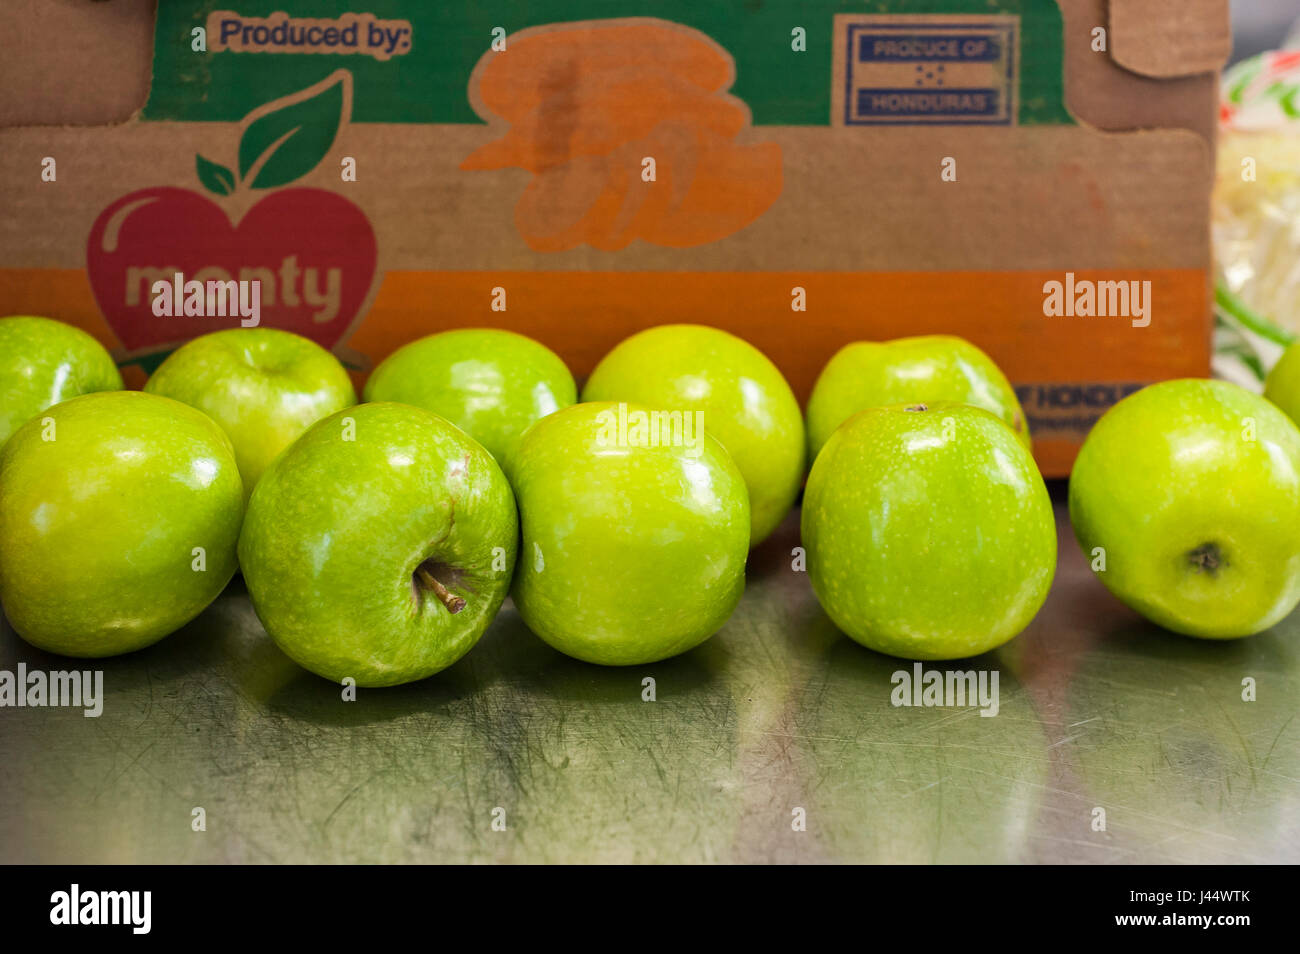 Granny Smith apples Fruit Food healthy Ingredients for apple pies Stock Photo